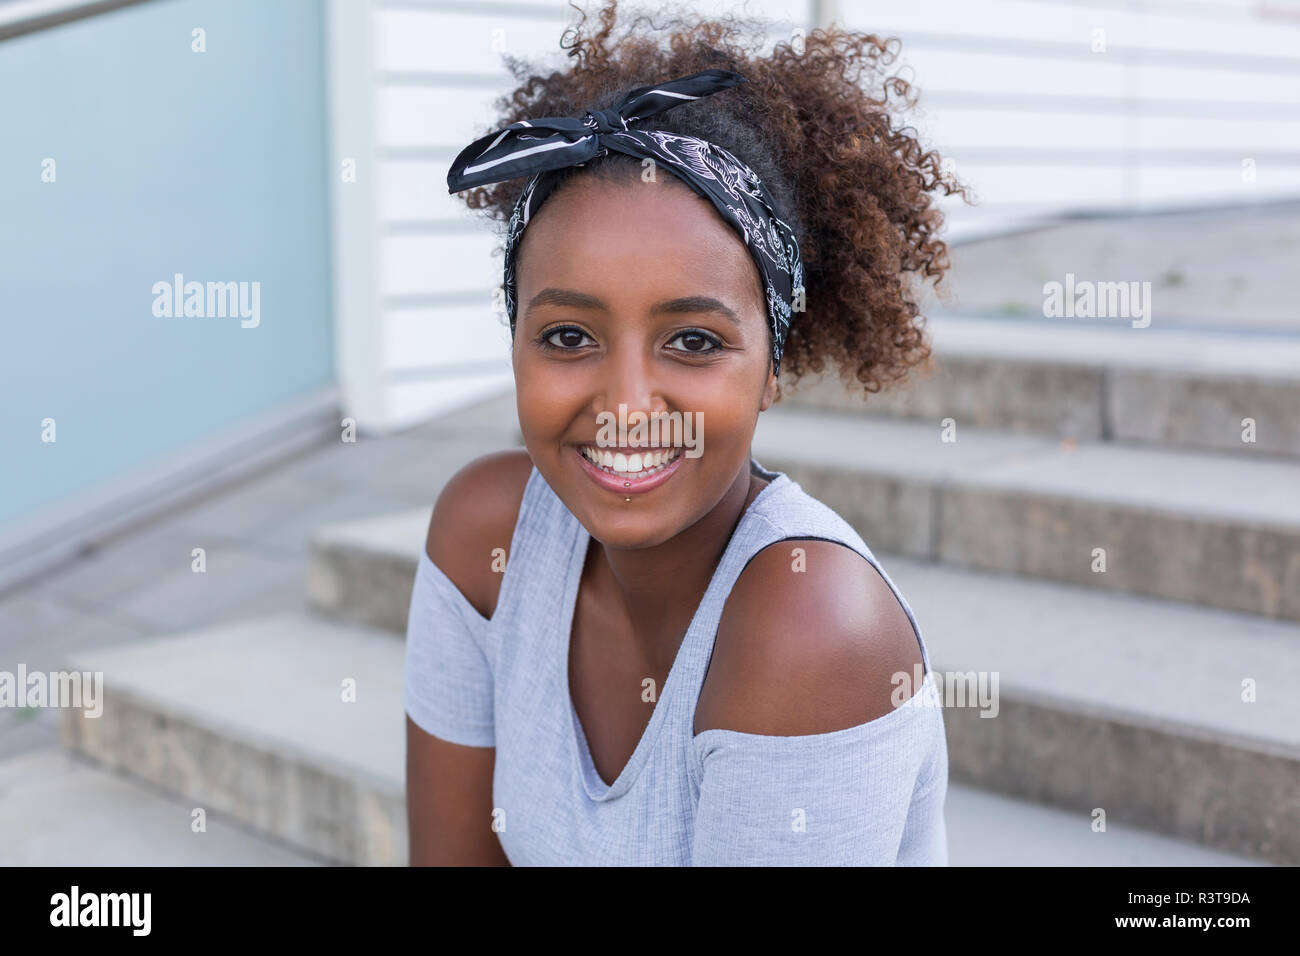 Portrait of smiling young woman wearing hair-band sitting on stairs Stock Photo